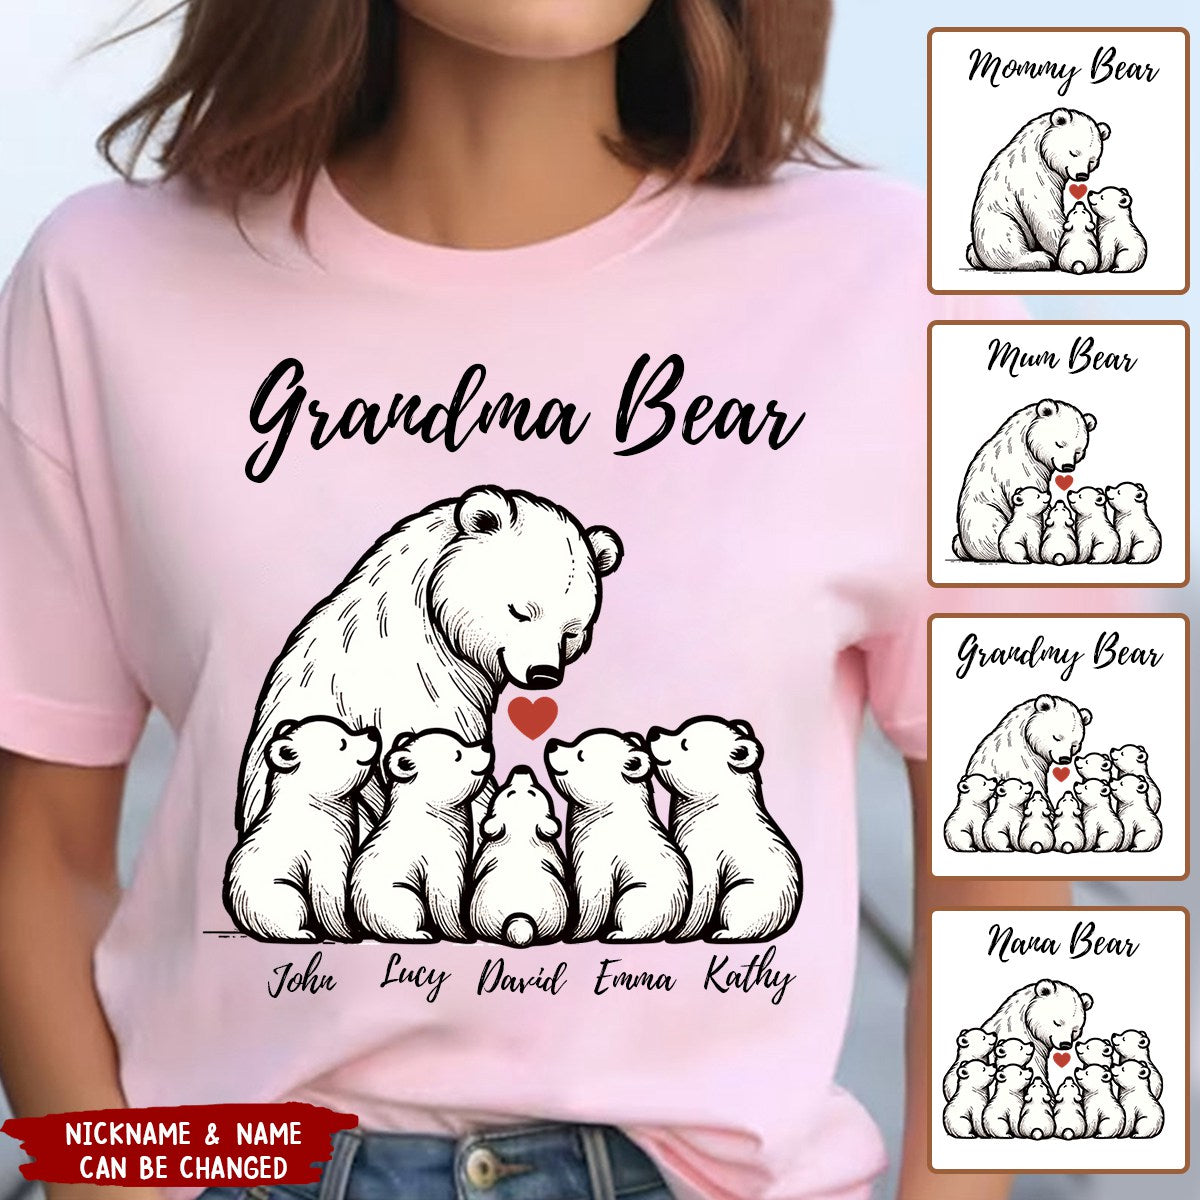 Personalized Bear With Little Bear Kids Pure Cotton T-Shirt